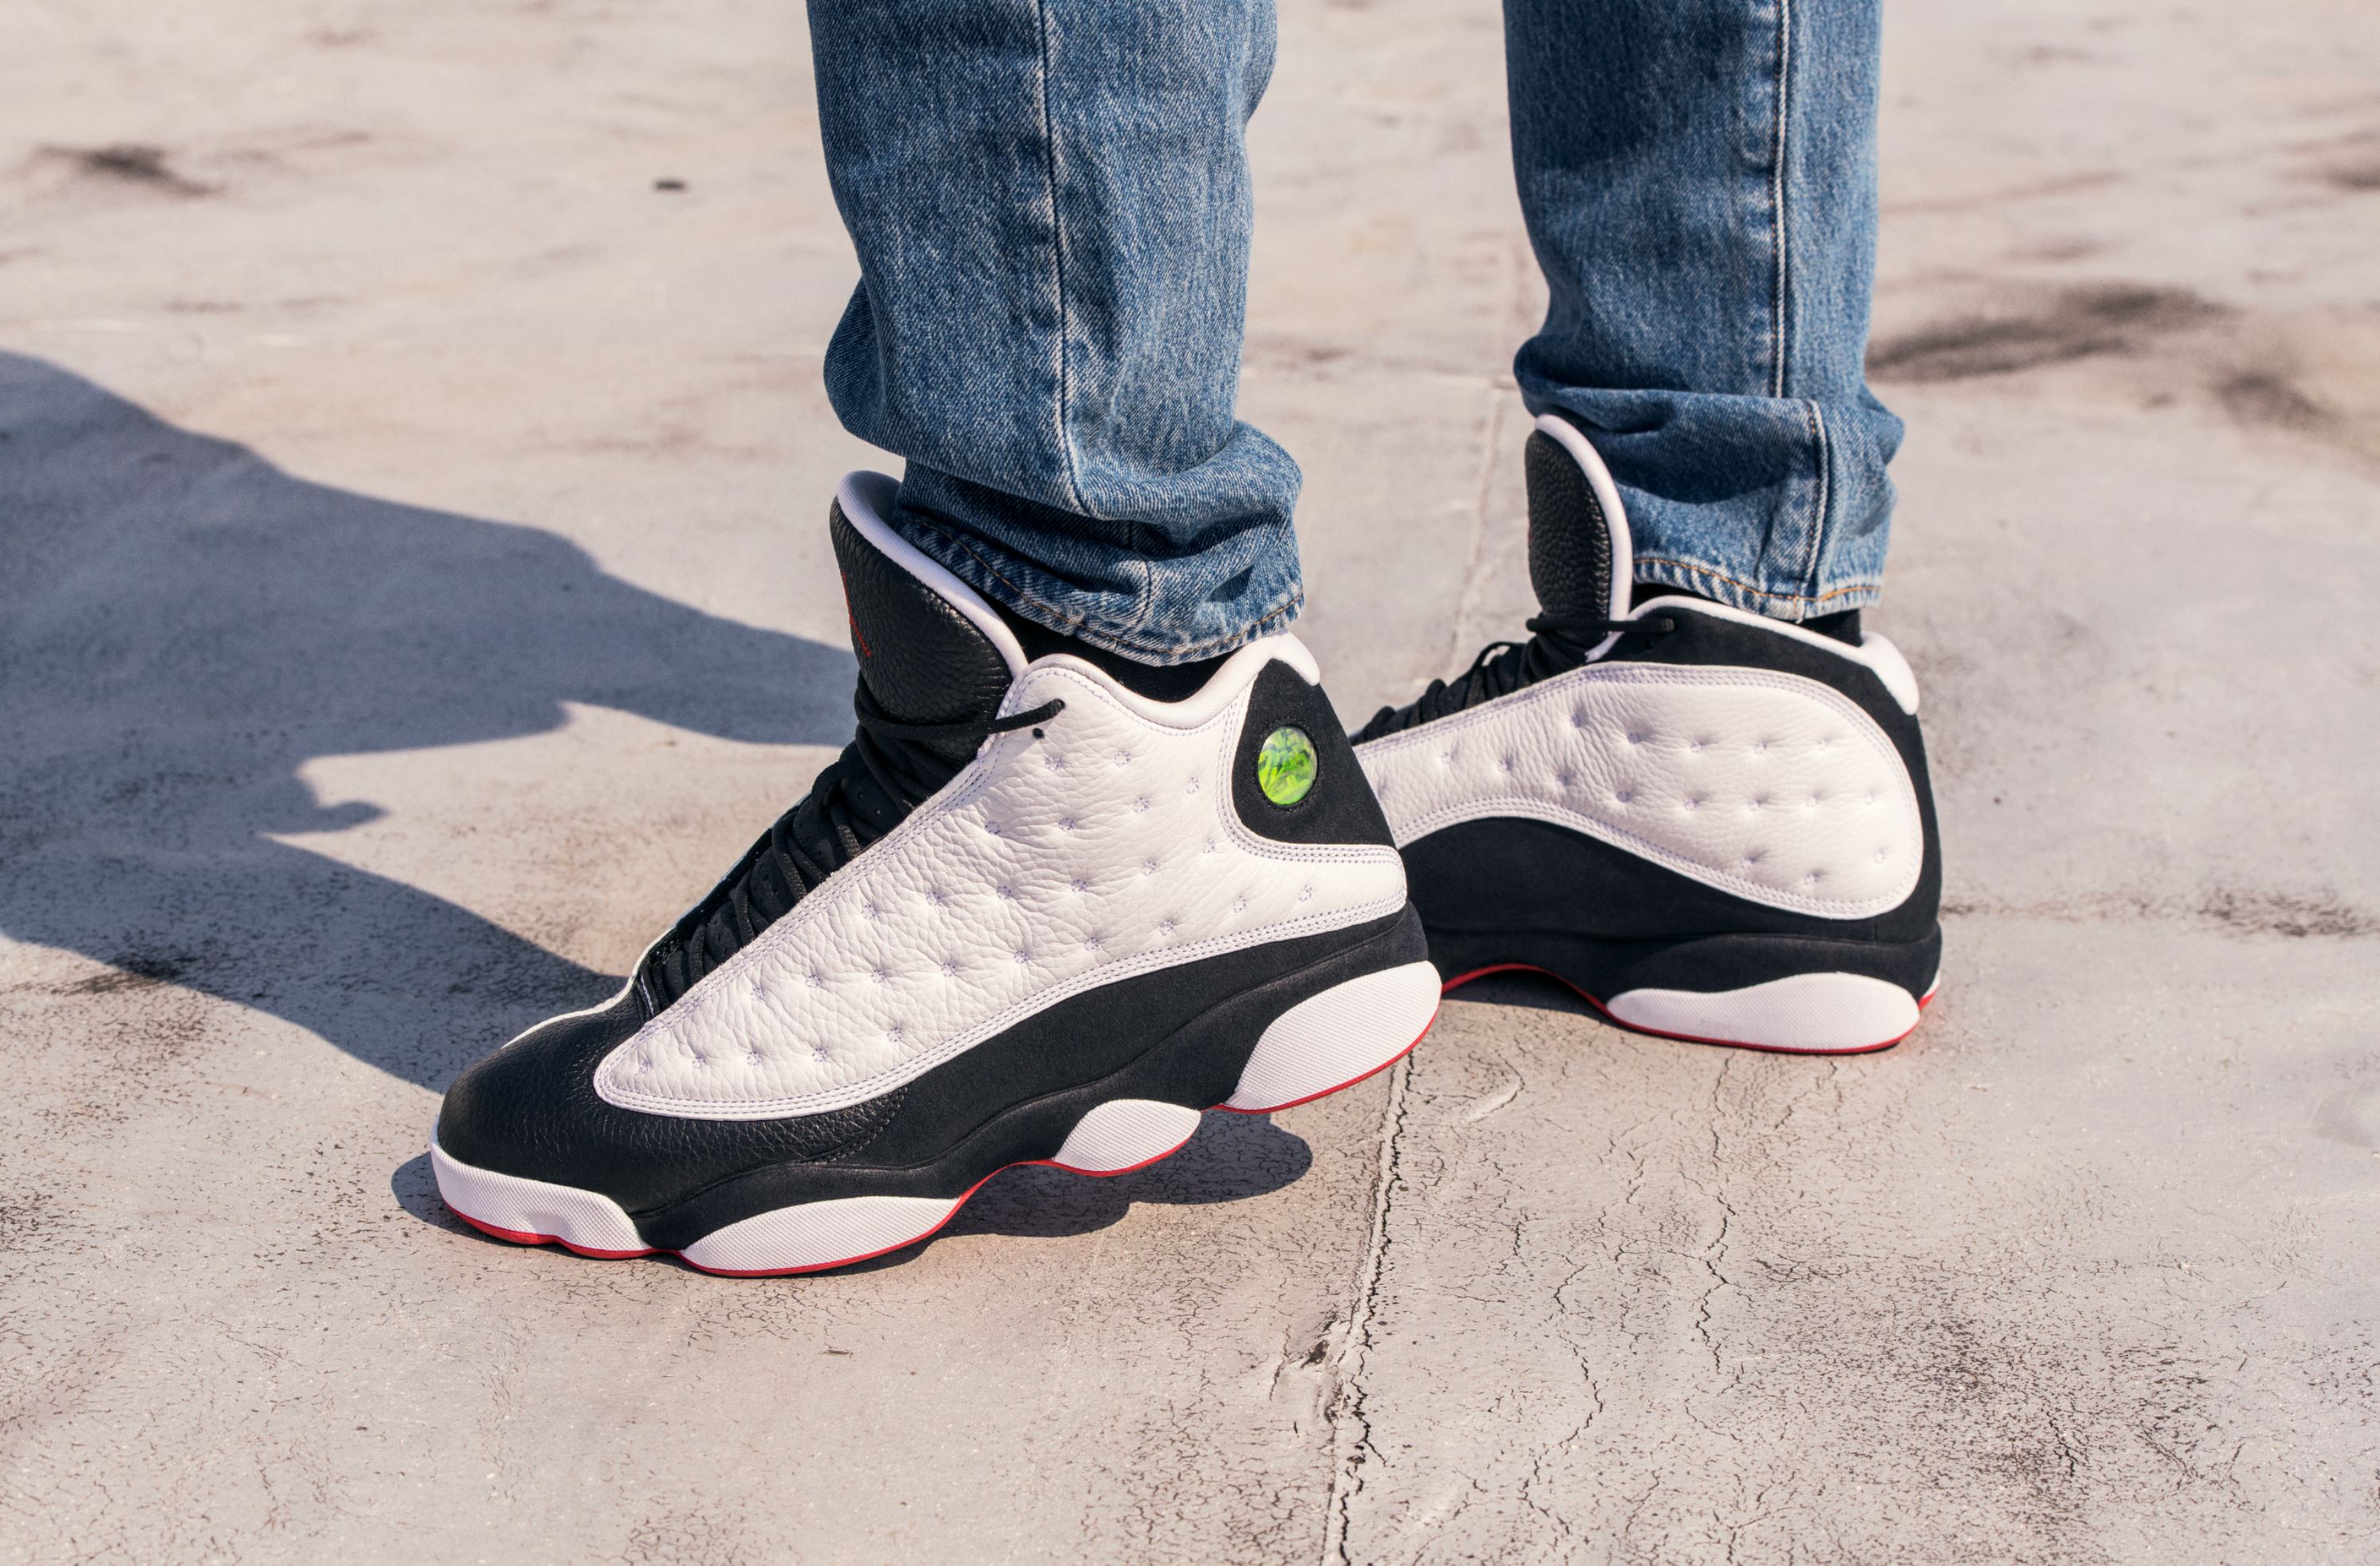 The Air Jordan 13 'He Got Game' Release Date Has Been Moved Up 